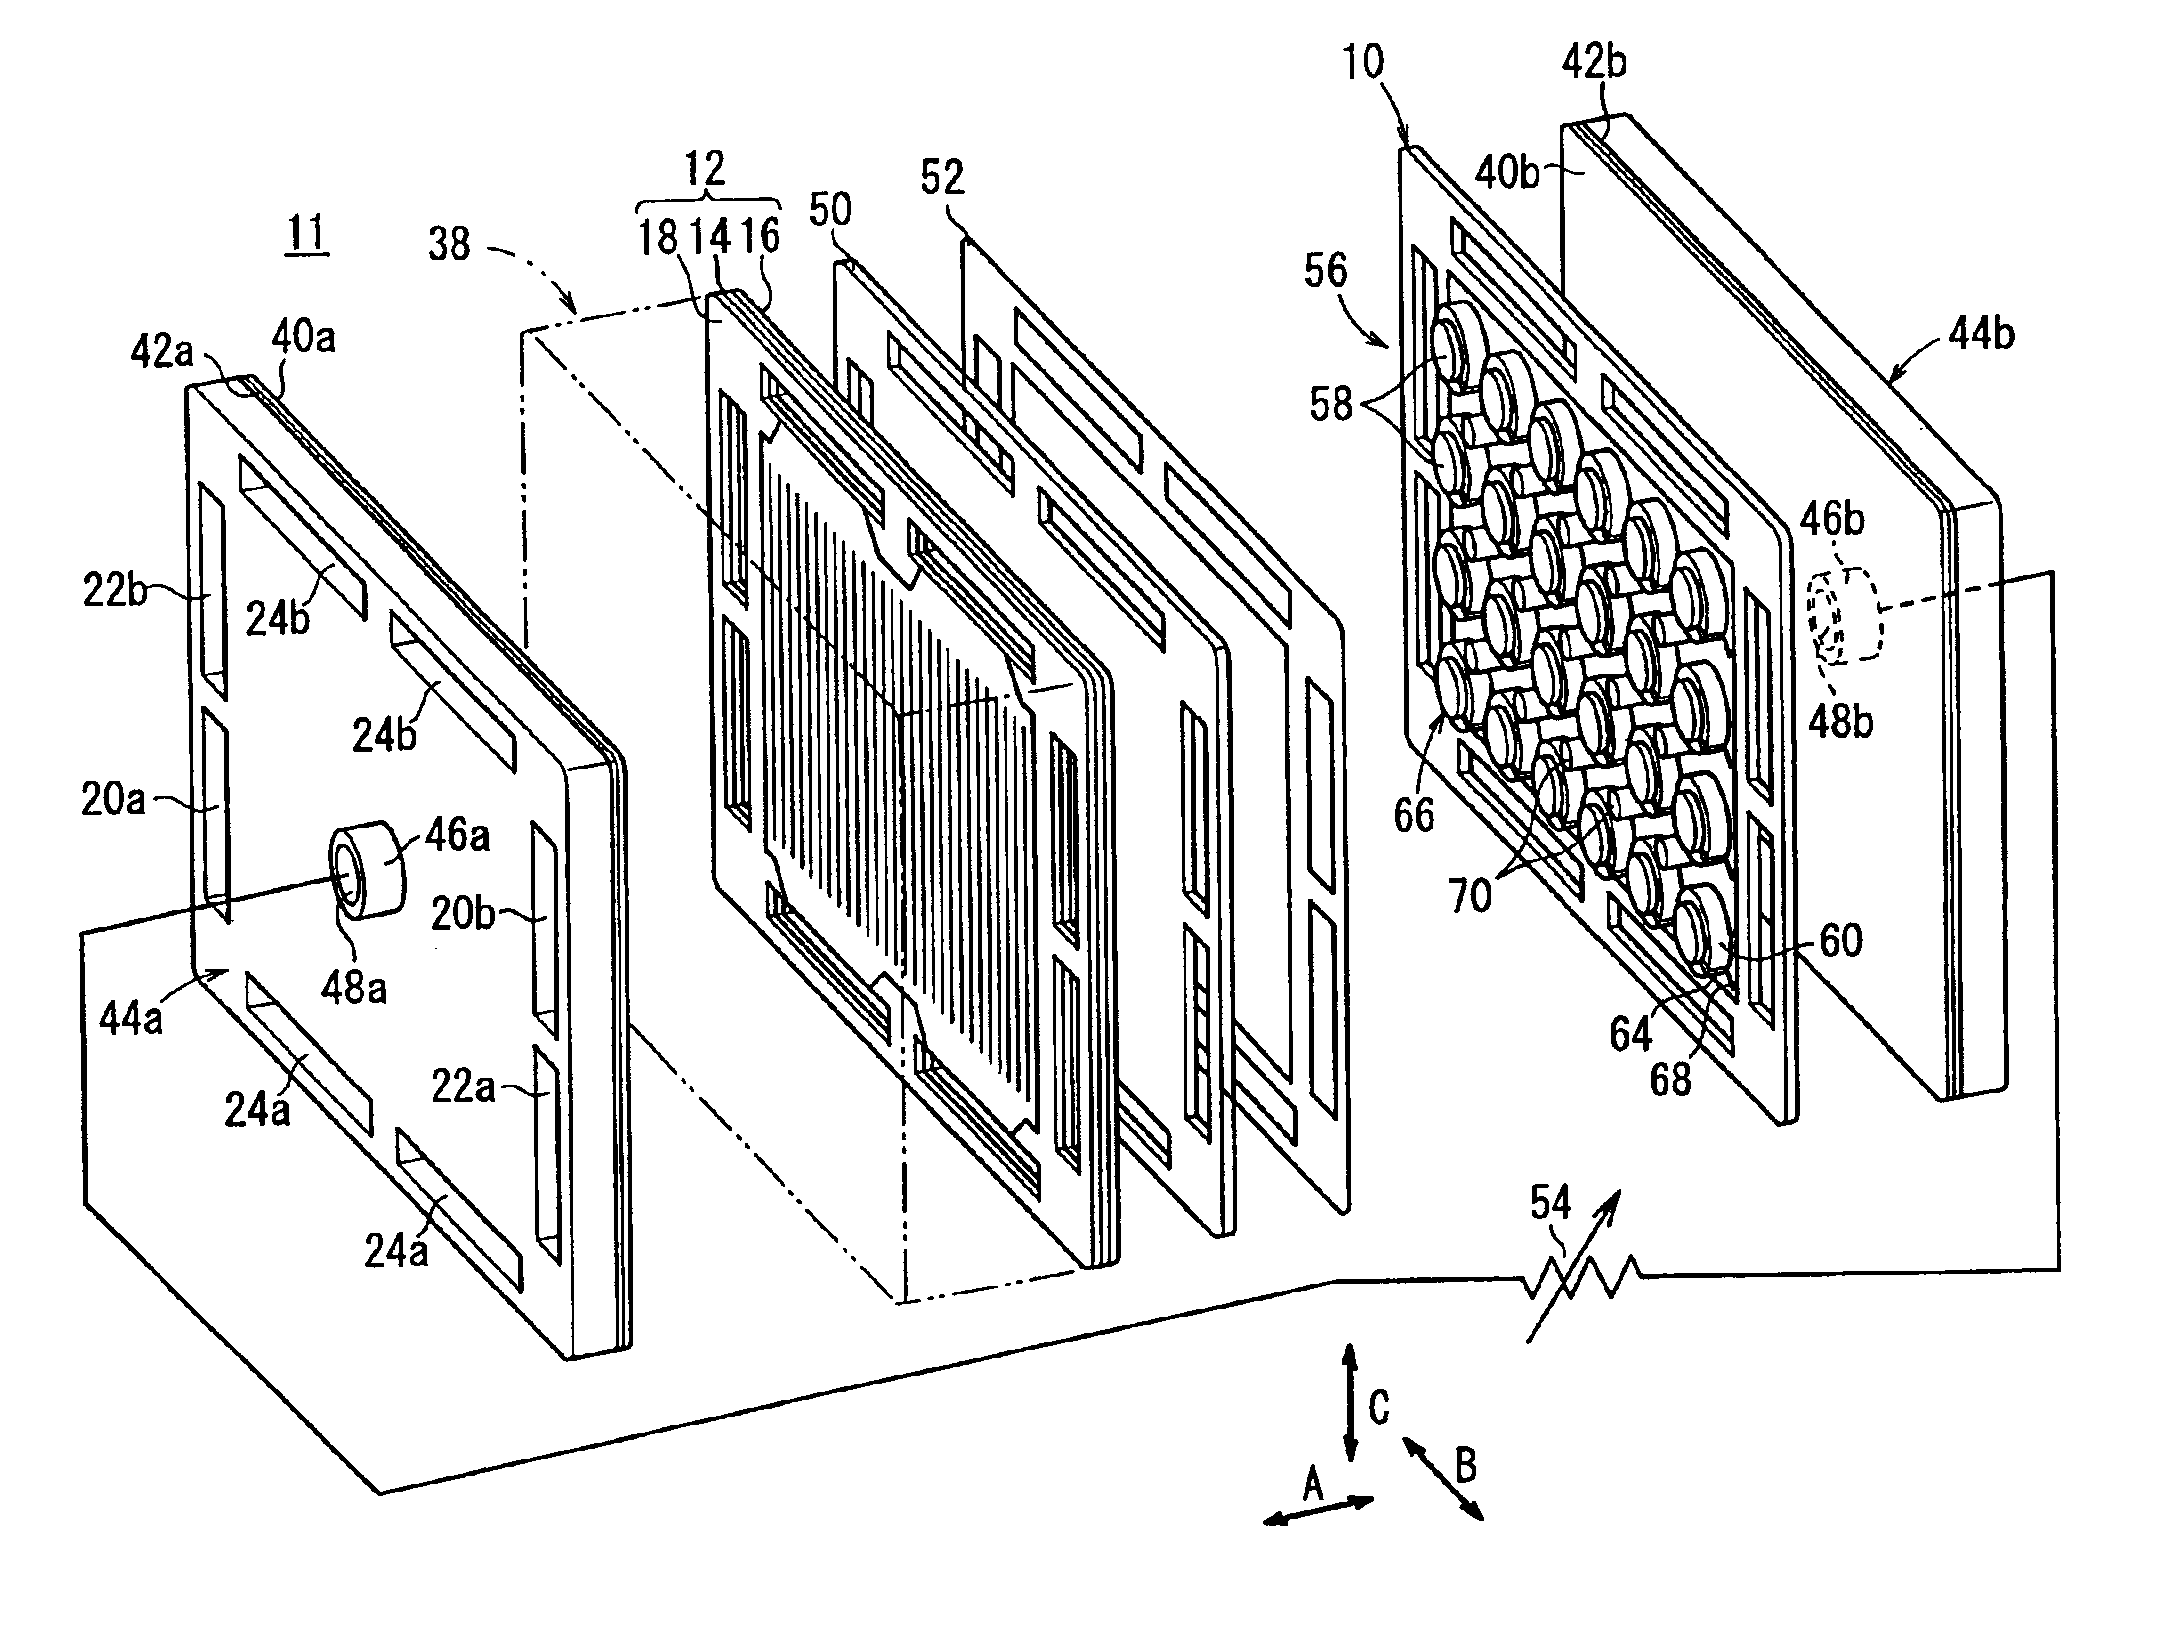 Apparatus for measuring current density of fuel cell